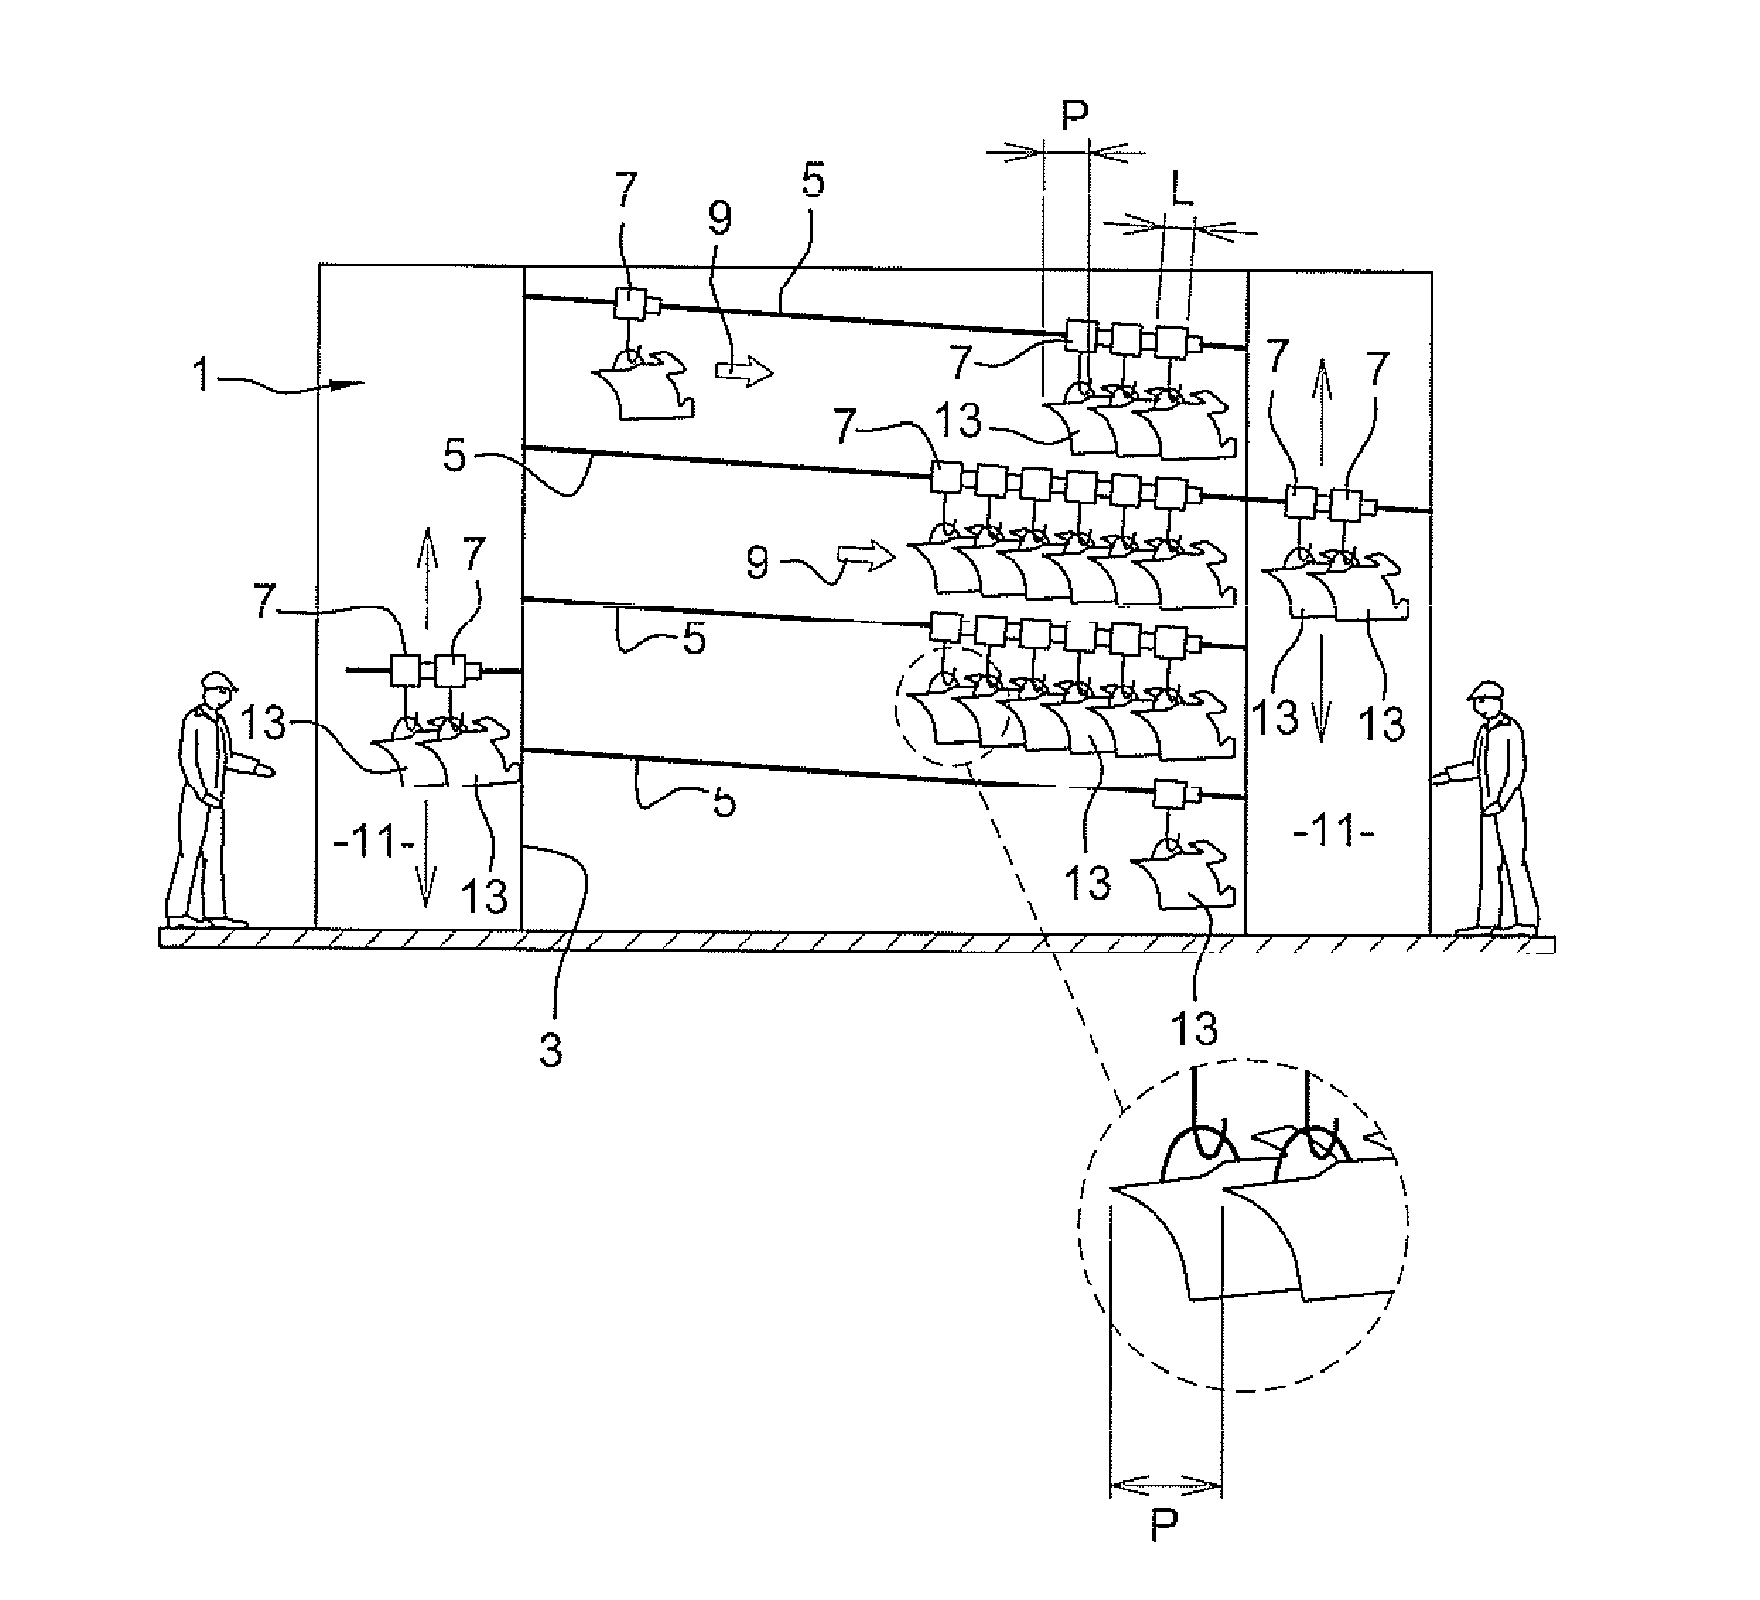 Static temporary storage device for motor vehicle body parts